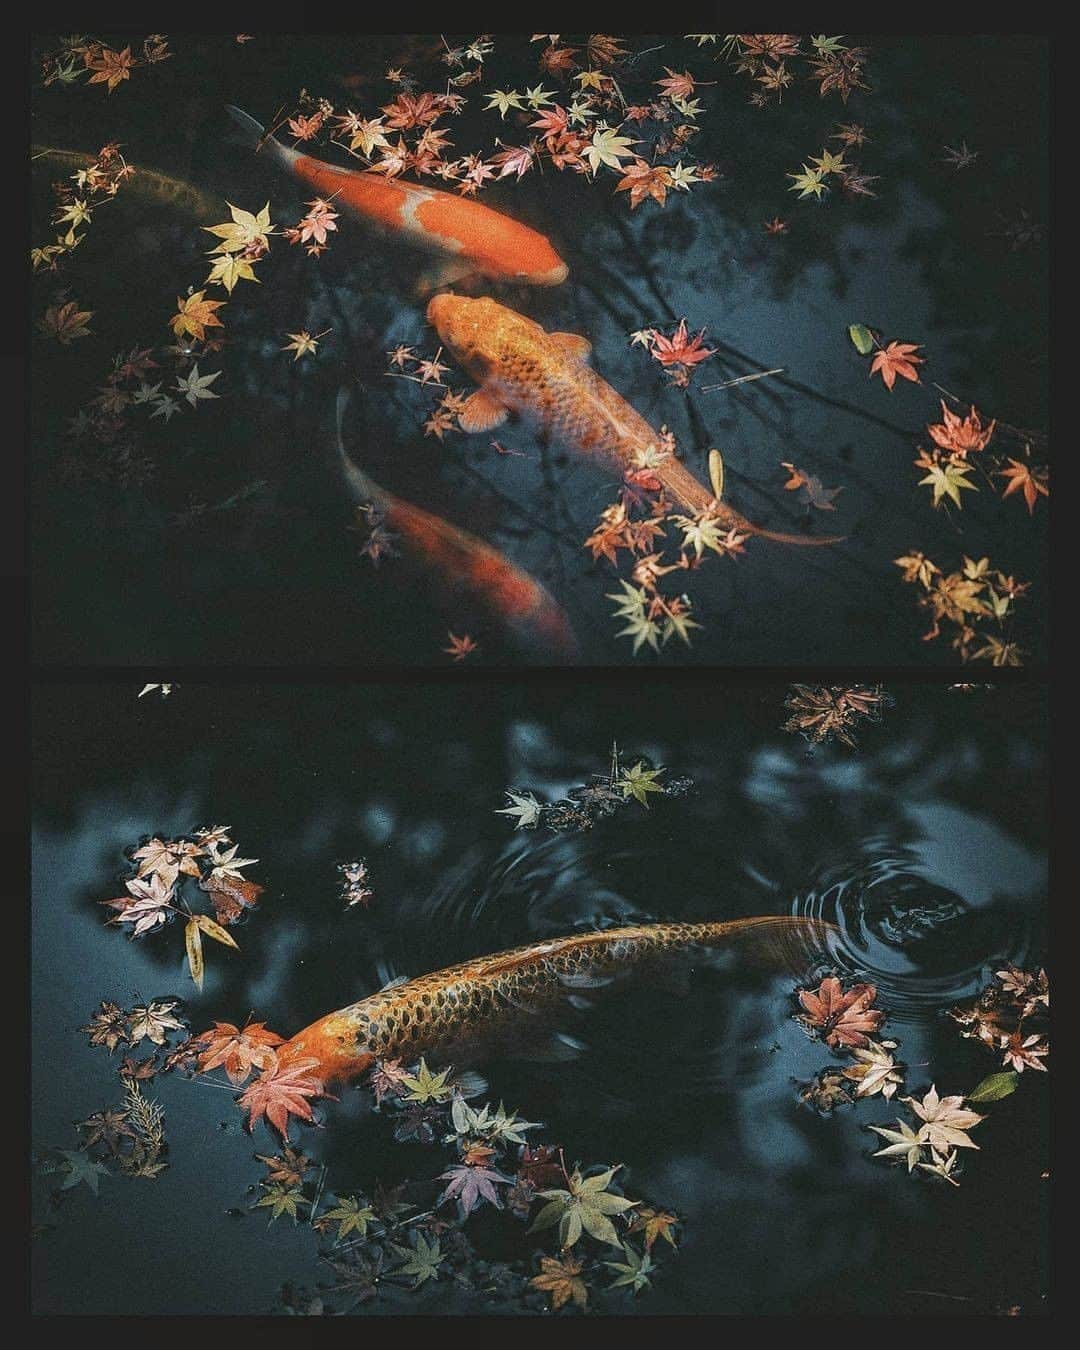 Discover Earthさんのインスタグラム写真 - (Discover EarthInstagram)「Which picture is your favourite?  "1, Nagano : It was one of hardest shoot I've ever done. I'm glad I didn't give up until I took this picture. 2, Kyoto : Beautiful carp and autumn leaves. I've always wanted to take pictures like these. 3, Nagano : With the help of Ms. Matsushita, who is handing down the good old days of Japanese life style, Thank you for your support! 4, Nara :There was one deer, so I brought it in. She was the best model, I was able to take some good pictures with you lady. 5, Izumo : The weather was very bad like storm, but I was able to take some moody pictures. 6, Nagano : Luckily, I had a deer family in my photo. But My friend @yuma1983 couldn't take pictures of the deer because he was smoking and they were leaving😂 7, Hokaido : The modern and very cool Big Buddha, designed by Tadao Ando. 8, Mt. Fuji : I wasn't able to reserve a window seat, but by chance there happened to be one available and I was able to take this picture! Super lucky! 9, Kyoto : I wanted to have a model for this scene, so I asked @nachan.b , who happened to be there. The rain had just stopped and I was able to take some good pictures. 10, Ishigaki Island : Beautiful morning glow captured by my friend @mitsuru_wakabayashi 's drone."  🇯🇵 #discoverjapan with @tokio_kid  . . . . #tokyo  #日本  #japanese  #manga  #kyoto  #osaka  #東京  #ig_japan  #写真好きな人と繋がりたい  #otaku  #igersjp  #instagramjapan  #ファインダー越しの私の世界  #team_jp_  #写真撮ってる人と繋がりたい  #일본  #tokyocameraclub  #lovers_nippon  #jdm  #夏  #icu_japan  #写真  #空  #東京カメラ部  #japanesefood  #京都  #wu_japan」1月3日 0時00分 - discoverearth